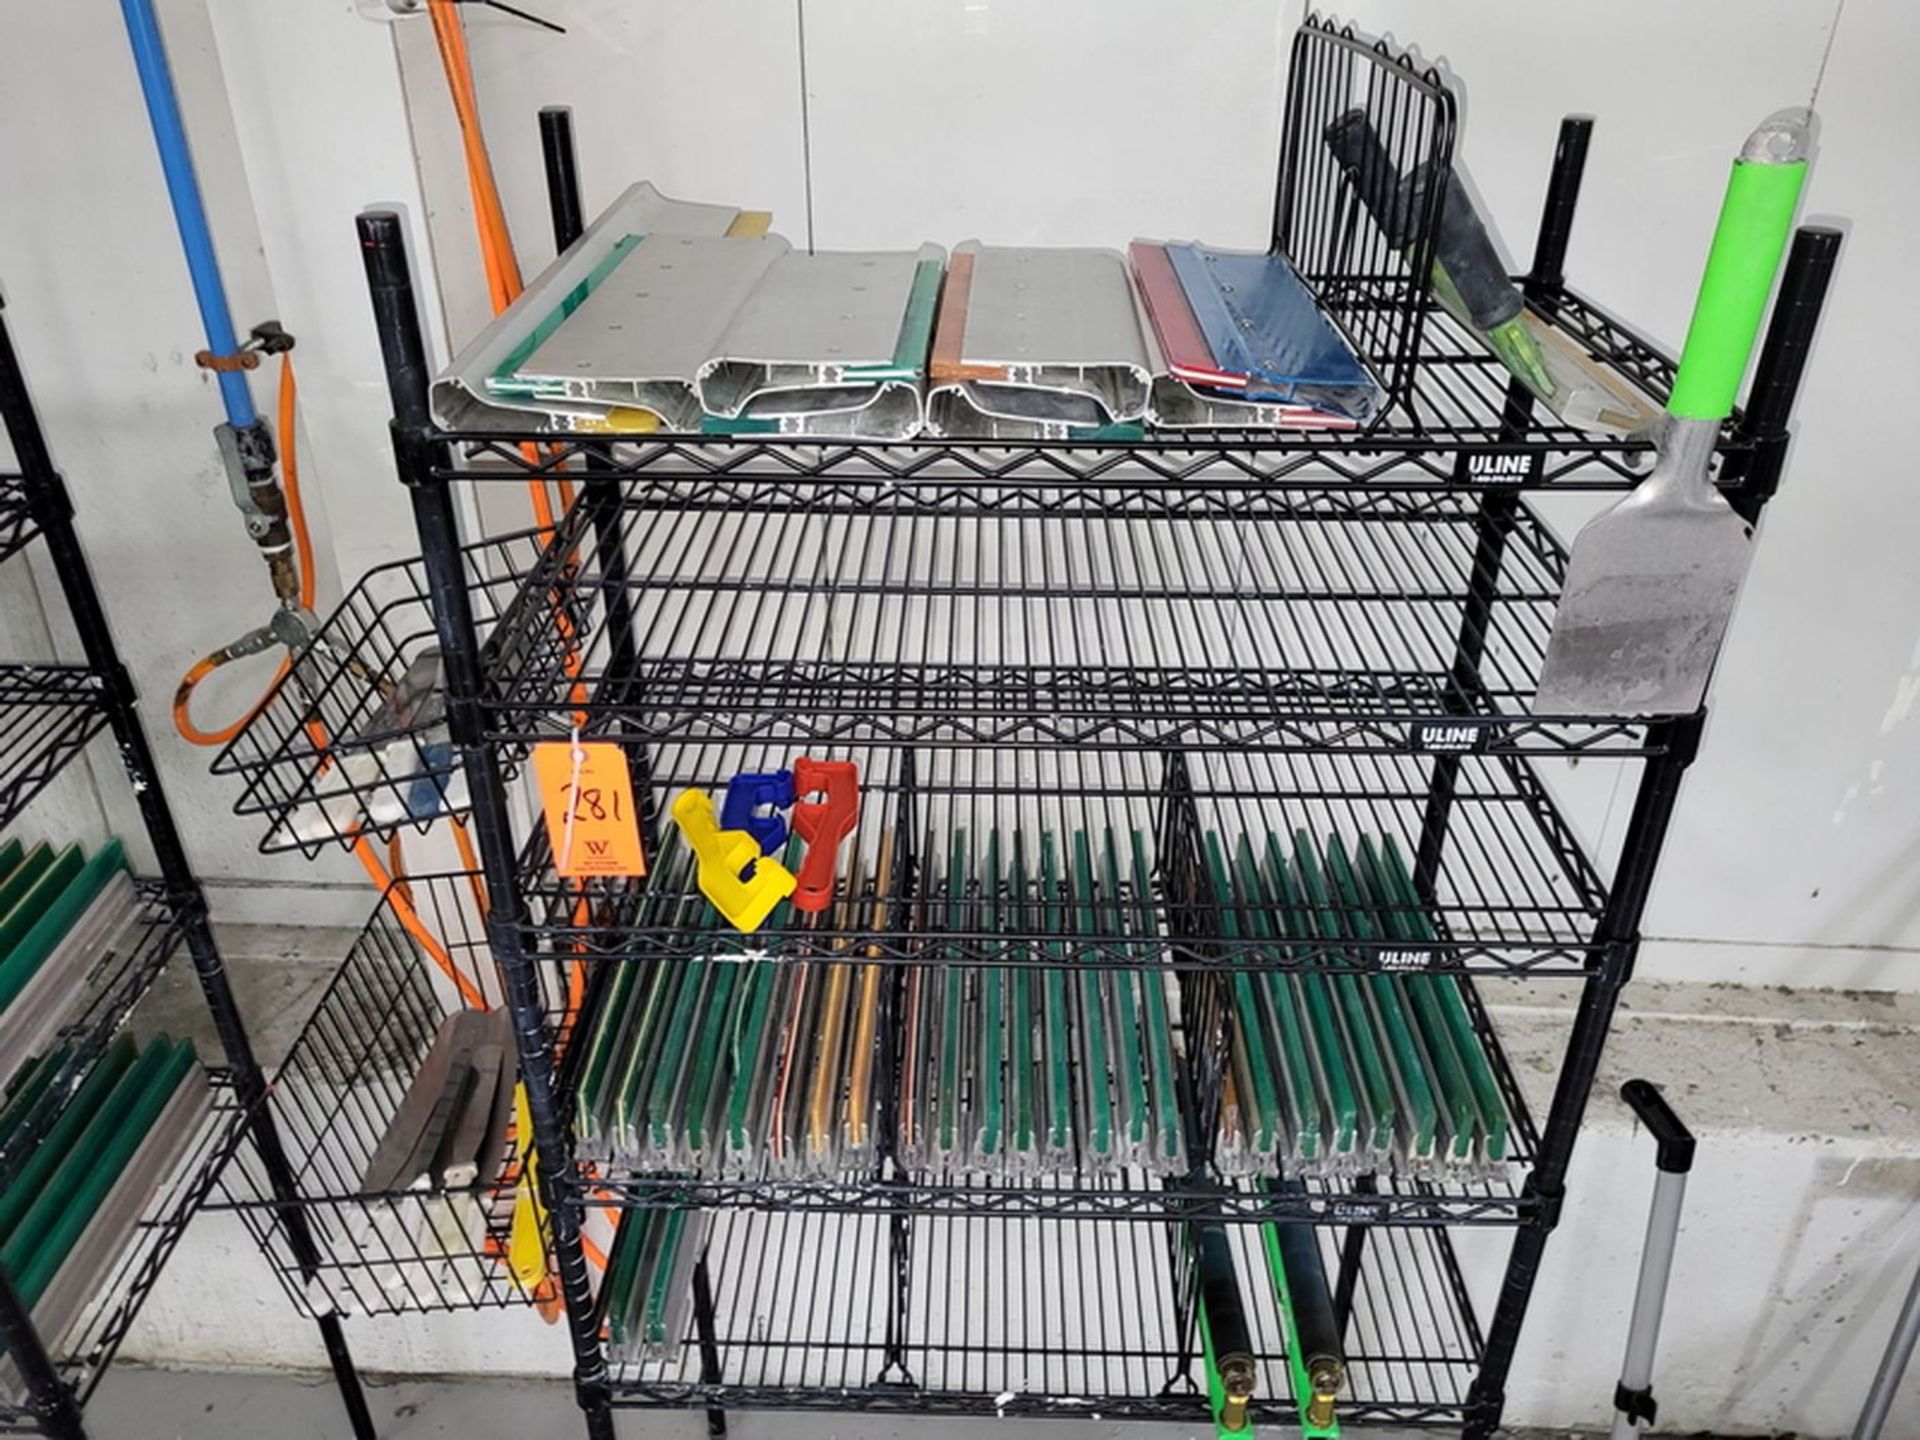 Lot - (2) Wire Racks & Contents with Squeegee's, Flood Bars & Related Tooling - Image 2 of 2